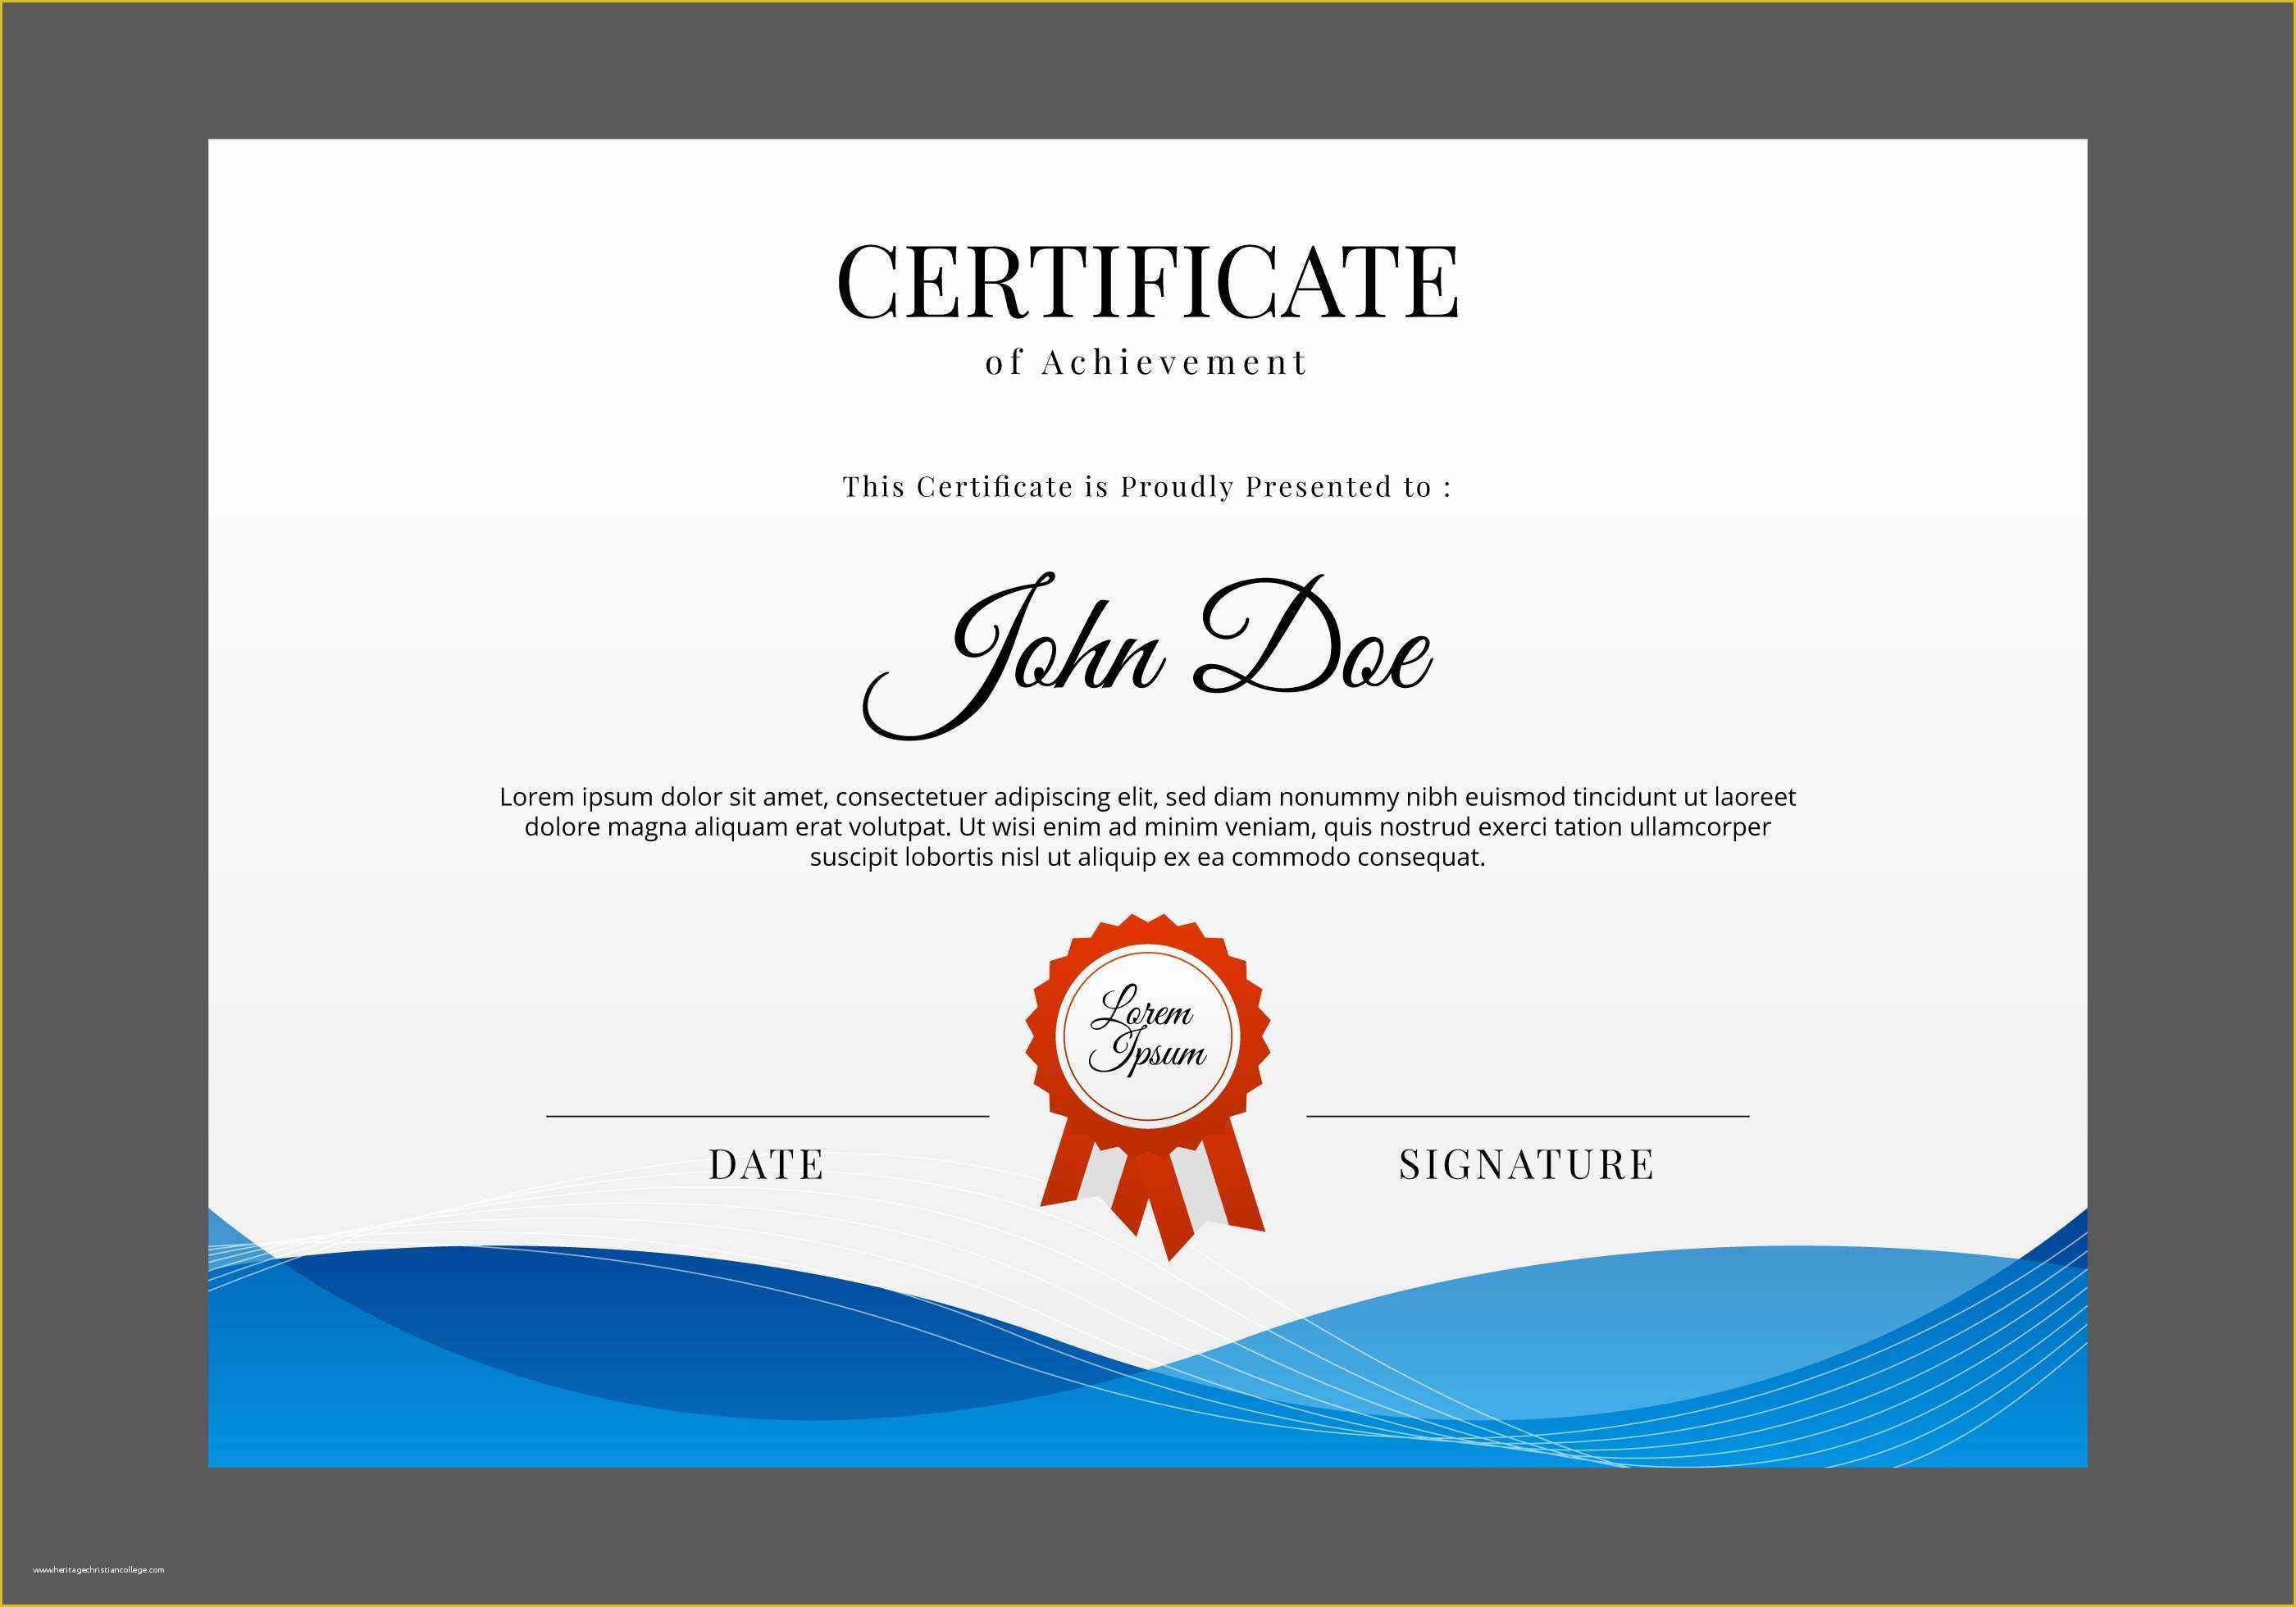 Certificate Templates Free Download Of Free Certificate Template Vector Download Free Vector